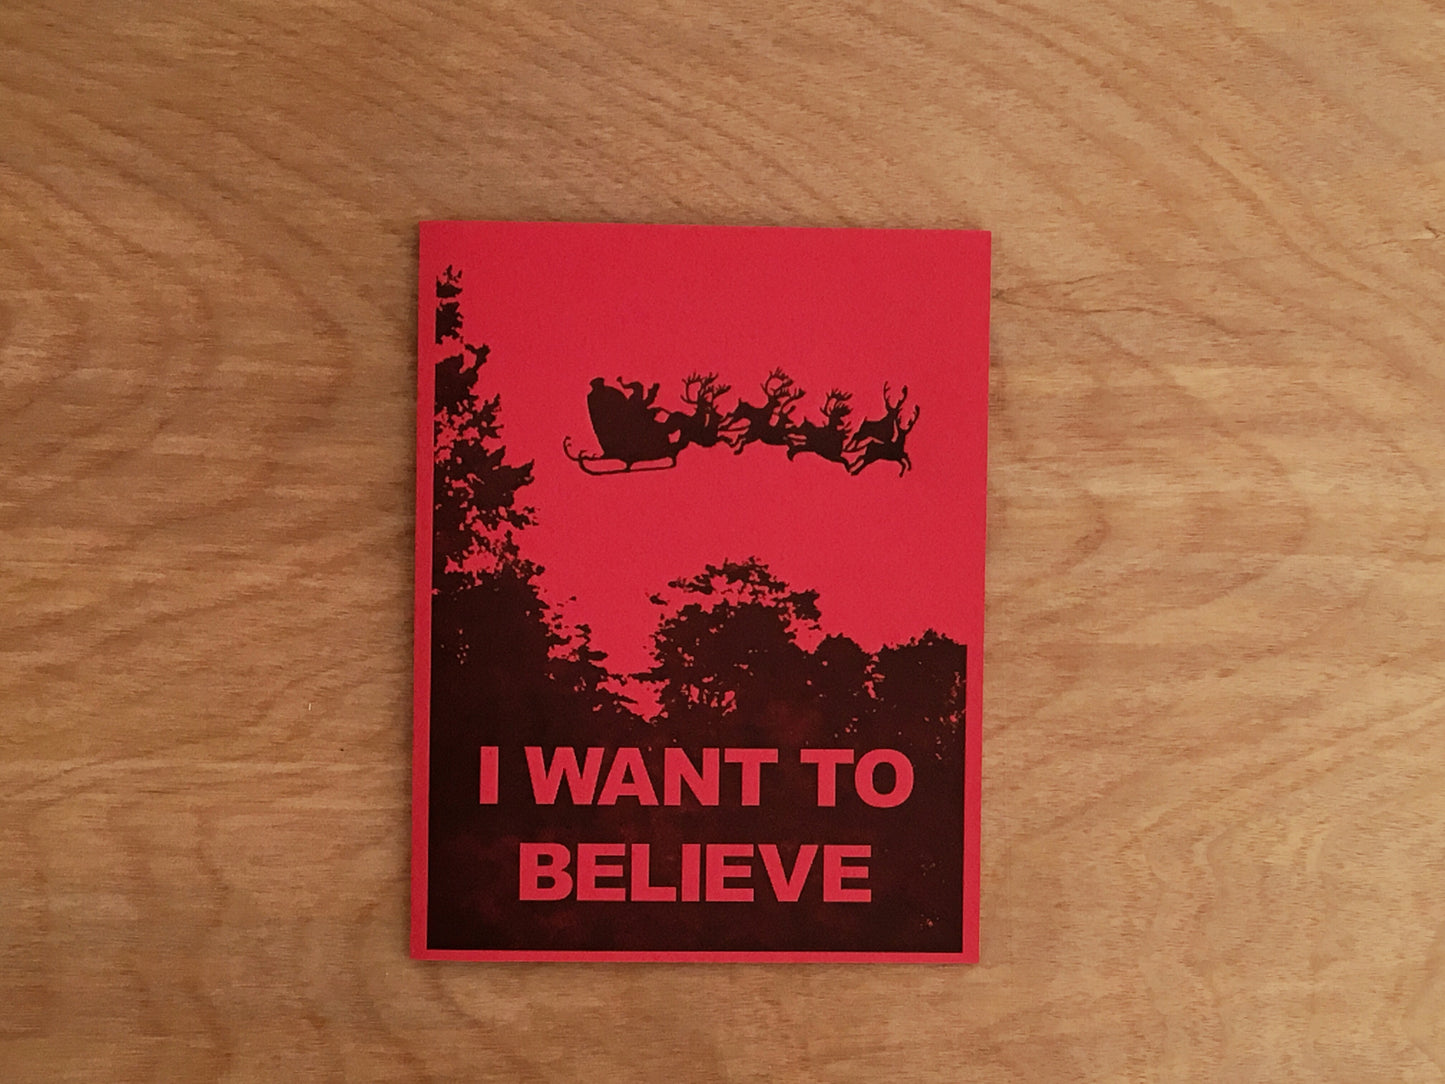 I Want to Believe. X-Files Parody Letterpress Holiday Card.